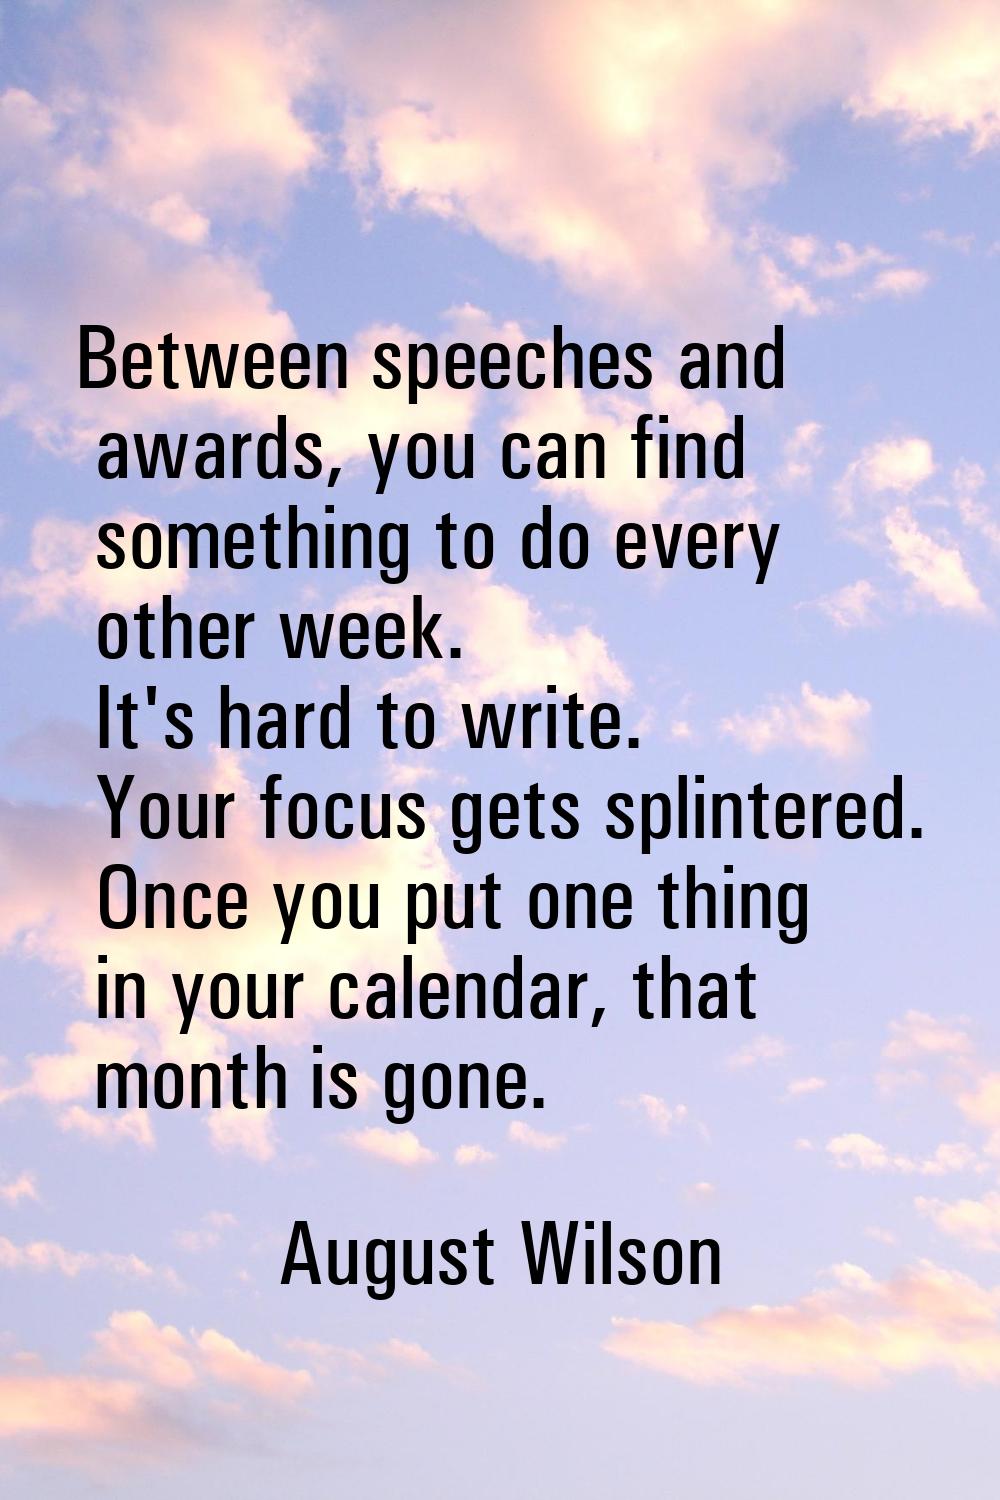 Between speeches and awards, you can find something to do every other week. It's hard to write. You